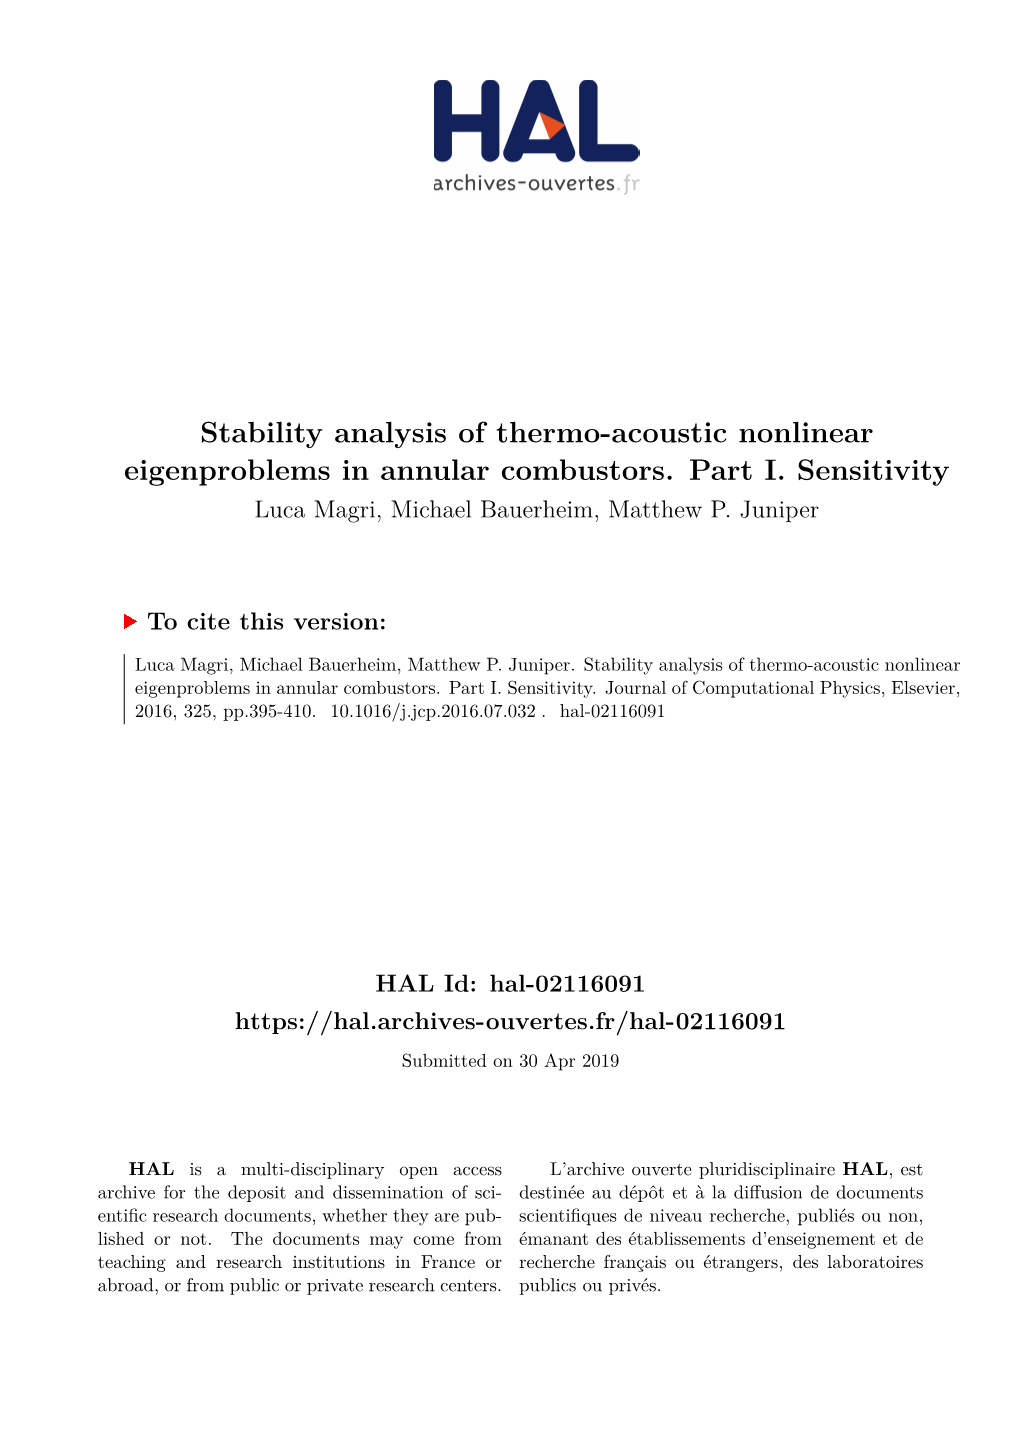 Stability Analysis of Thermo-Acoustic Nonlinear Eigenproblems in Annular Combustors